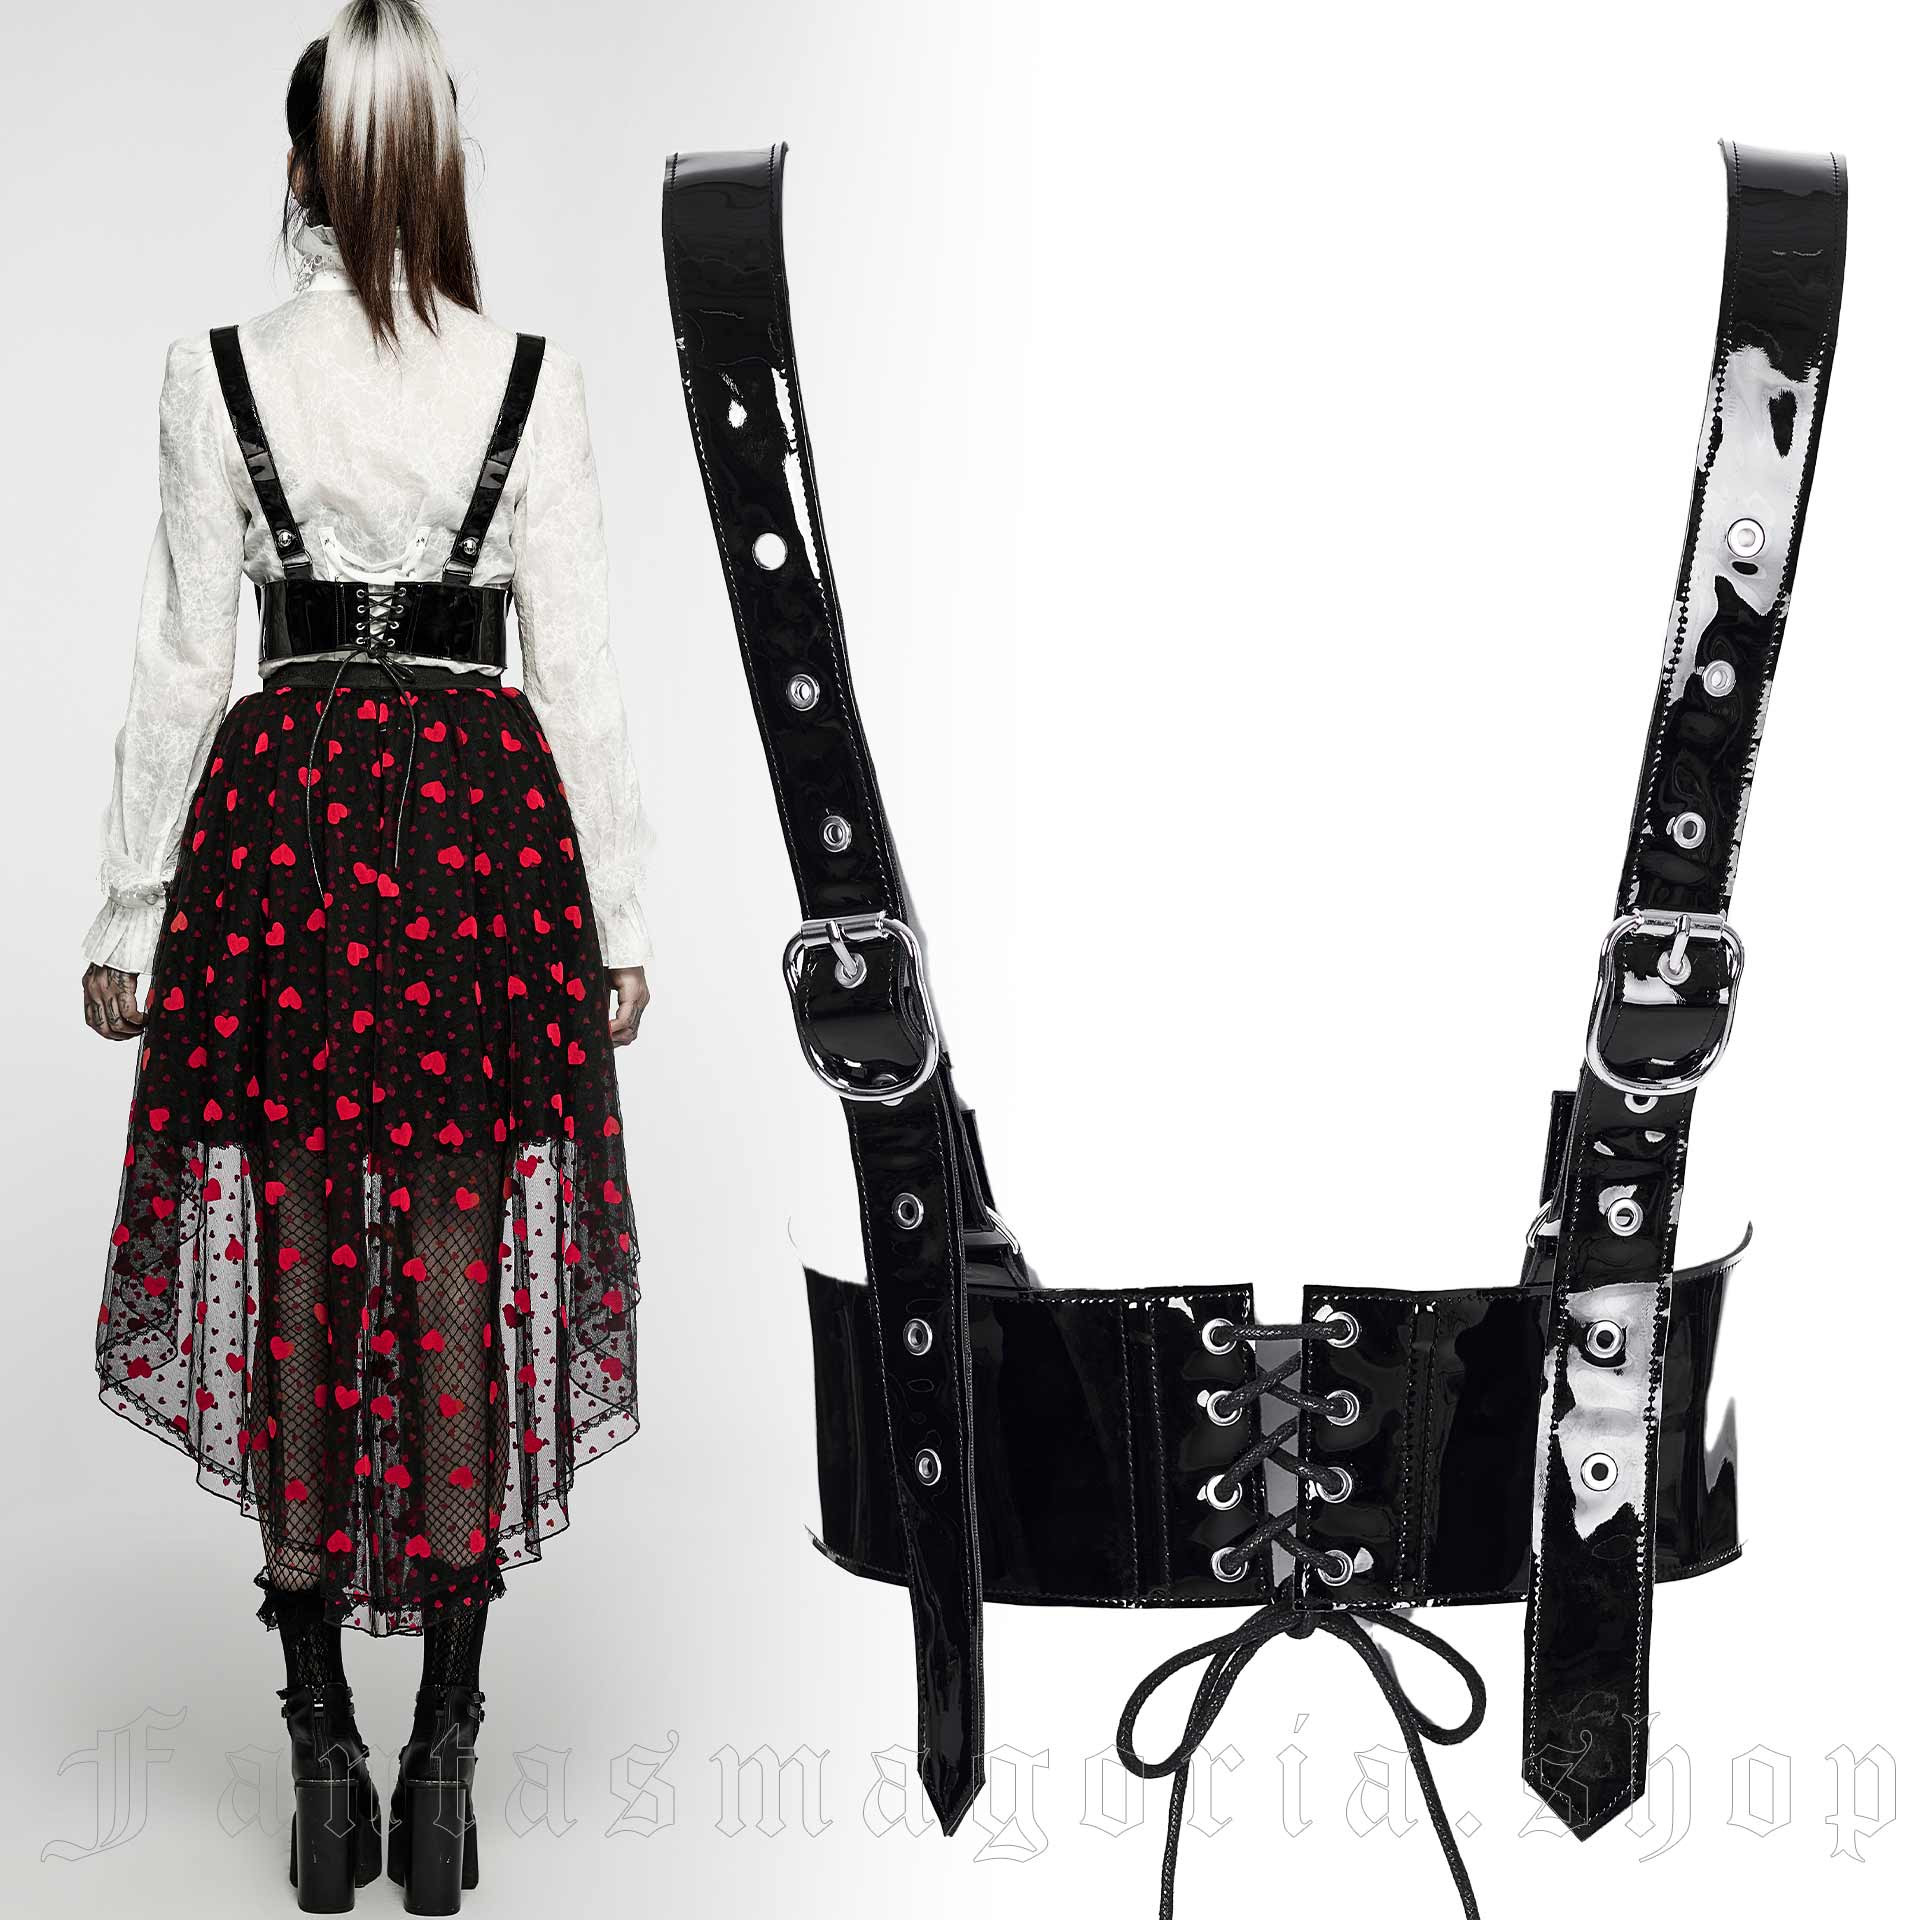 BODIY Plus Size Wide Waist Belt PU Black Harness for Women Gothic Punk Rock  Belts Halloween Rave Accessory for Dresses at  Women’s Clothing